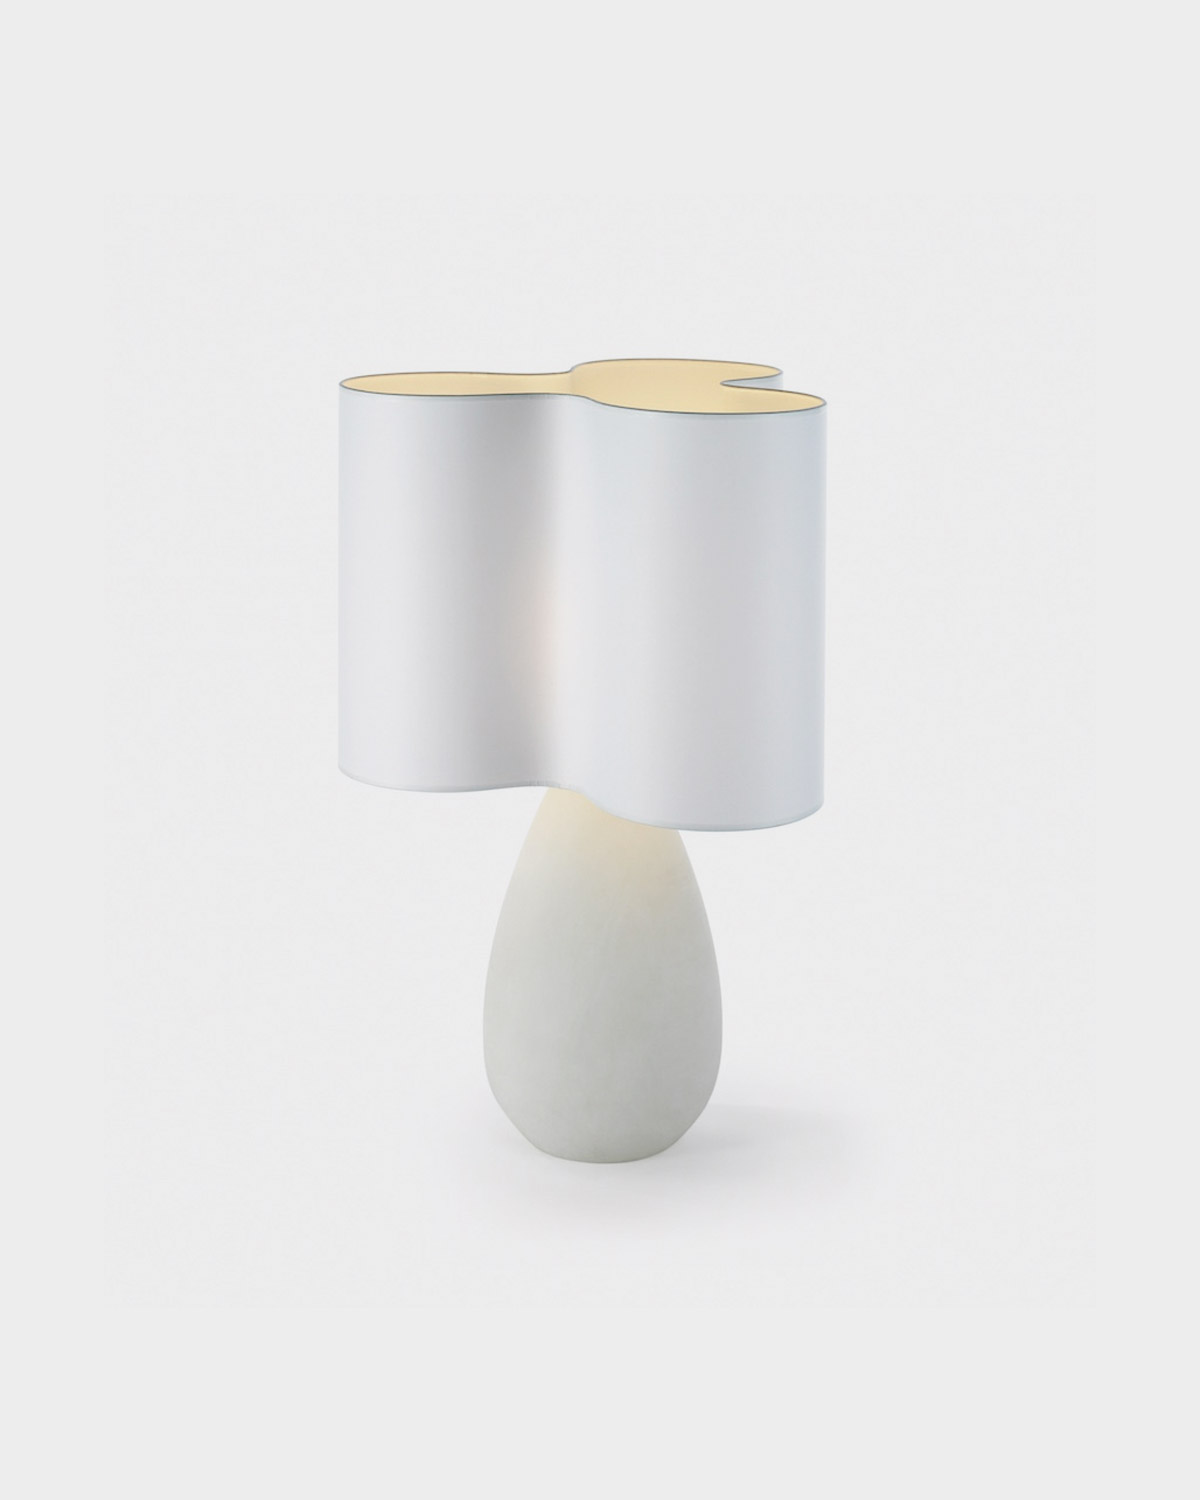 The Clover Table Lamp in Alabaster by Julien Barrault